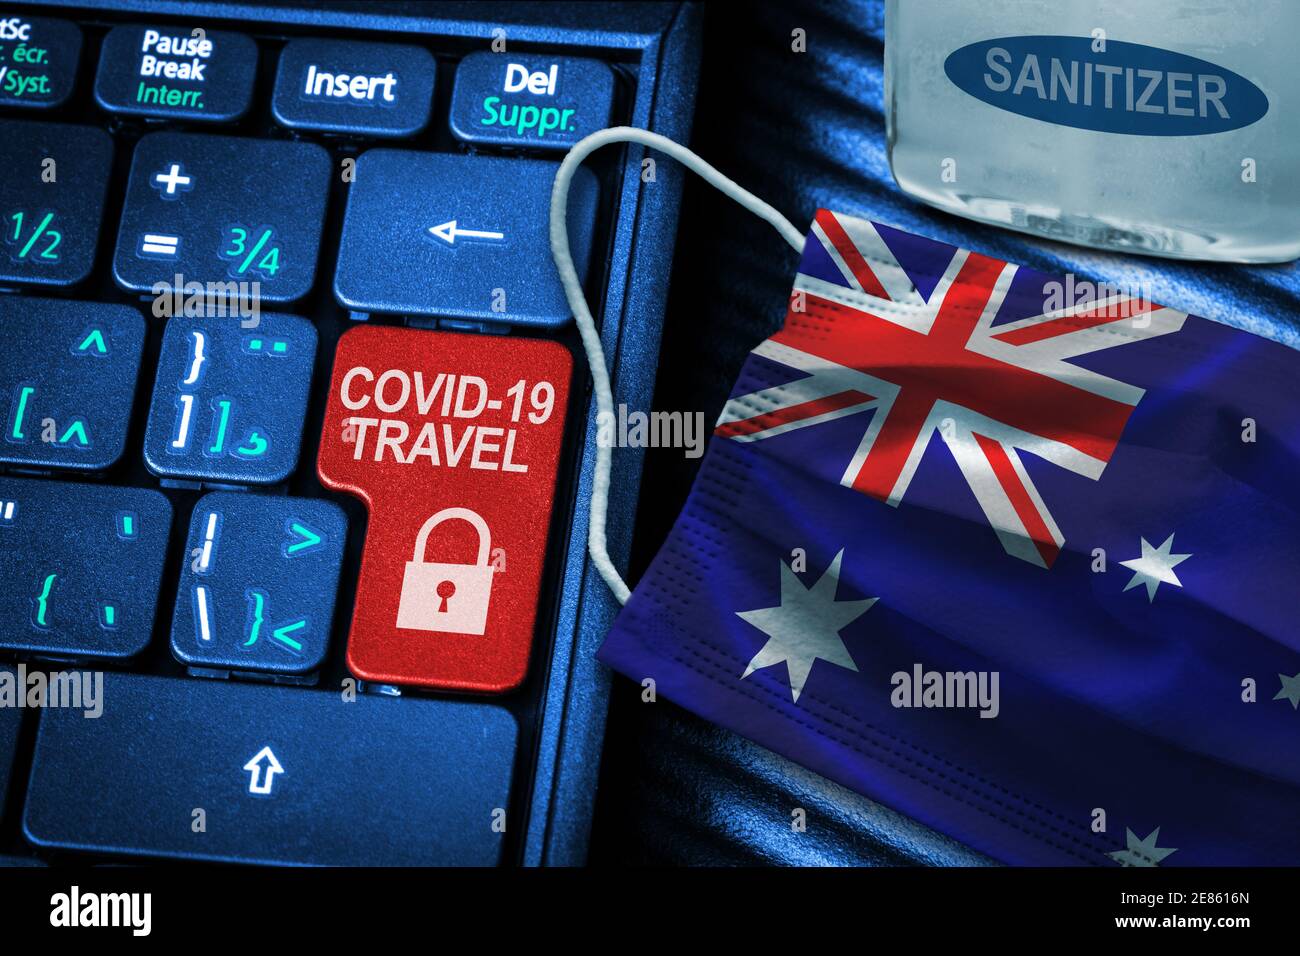 Australia COVID-19 coronavirus travel restrictions concept showing red button warning on keyboard with Australian flag face mask and hand sanitizer. N Stock Photo